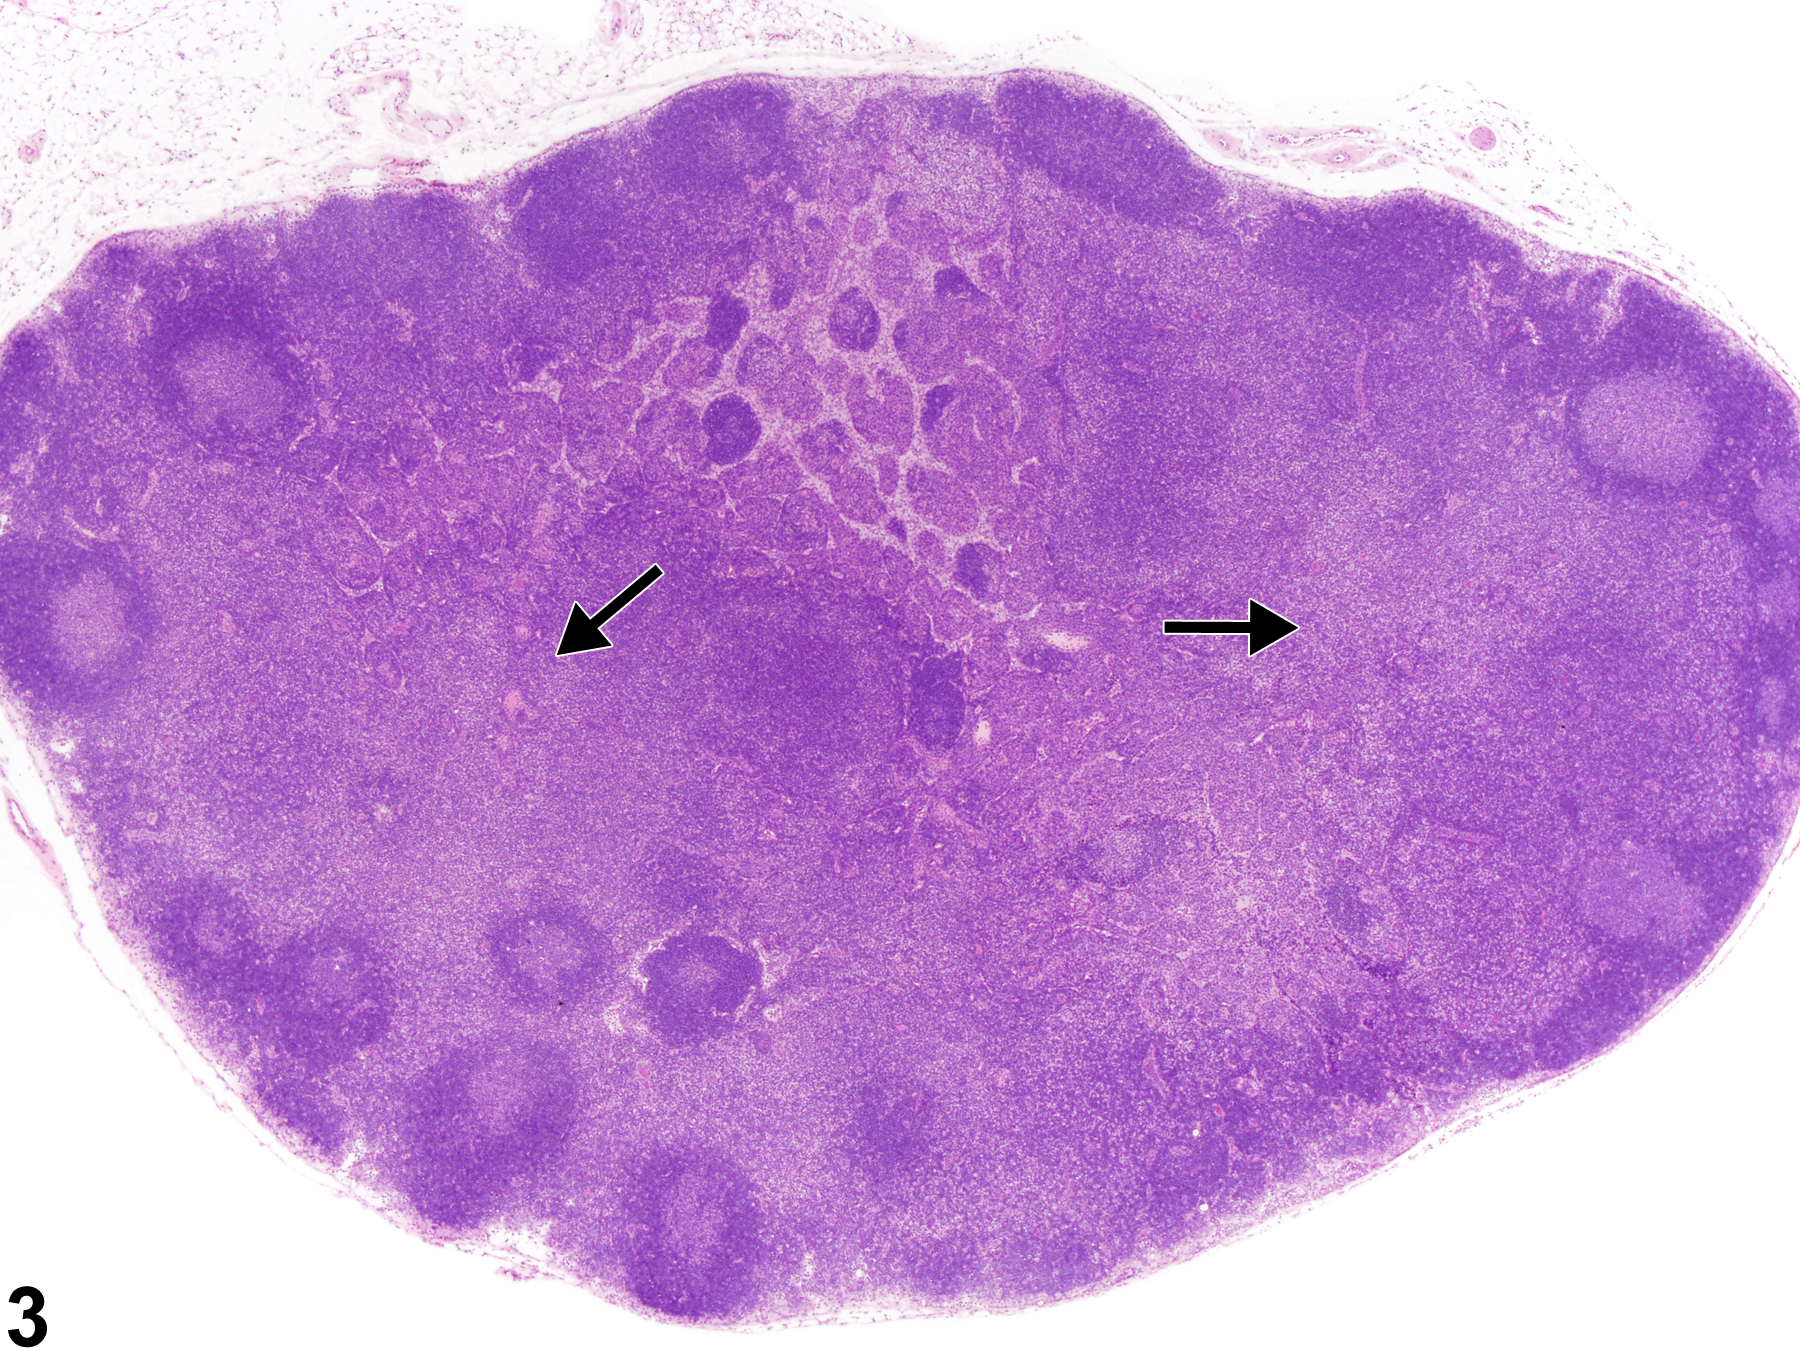 Image of hyperplasia, lymphocyte in the lymph node from a male B6C3F1/N mouse in a subchronic study